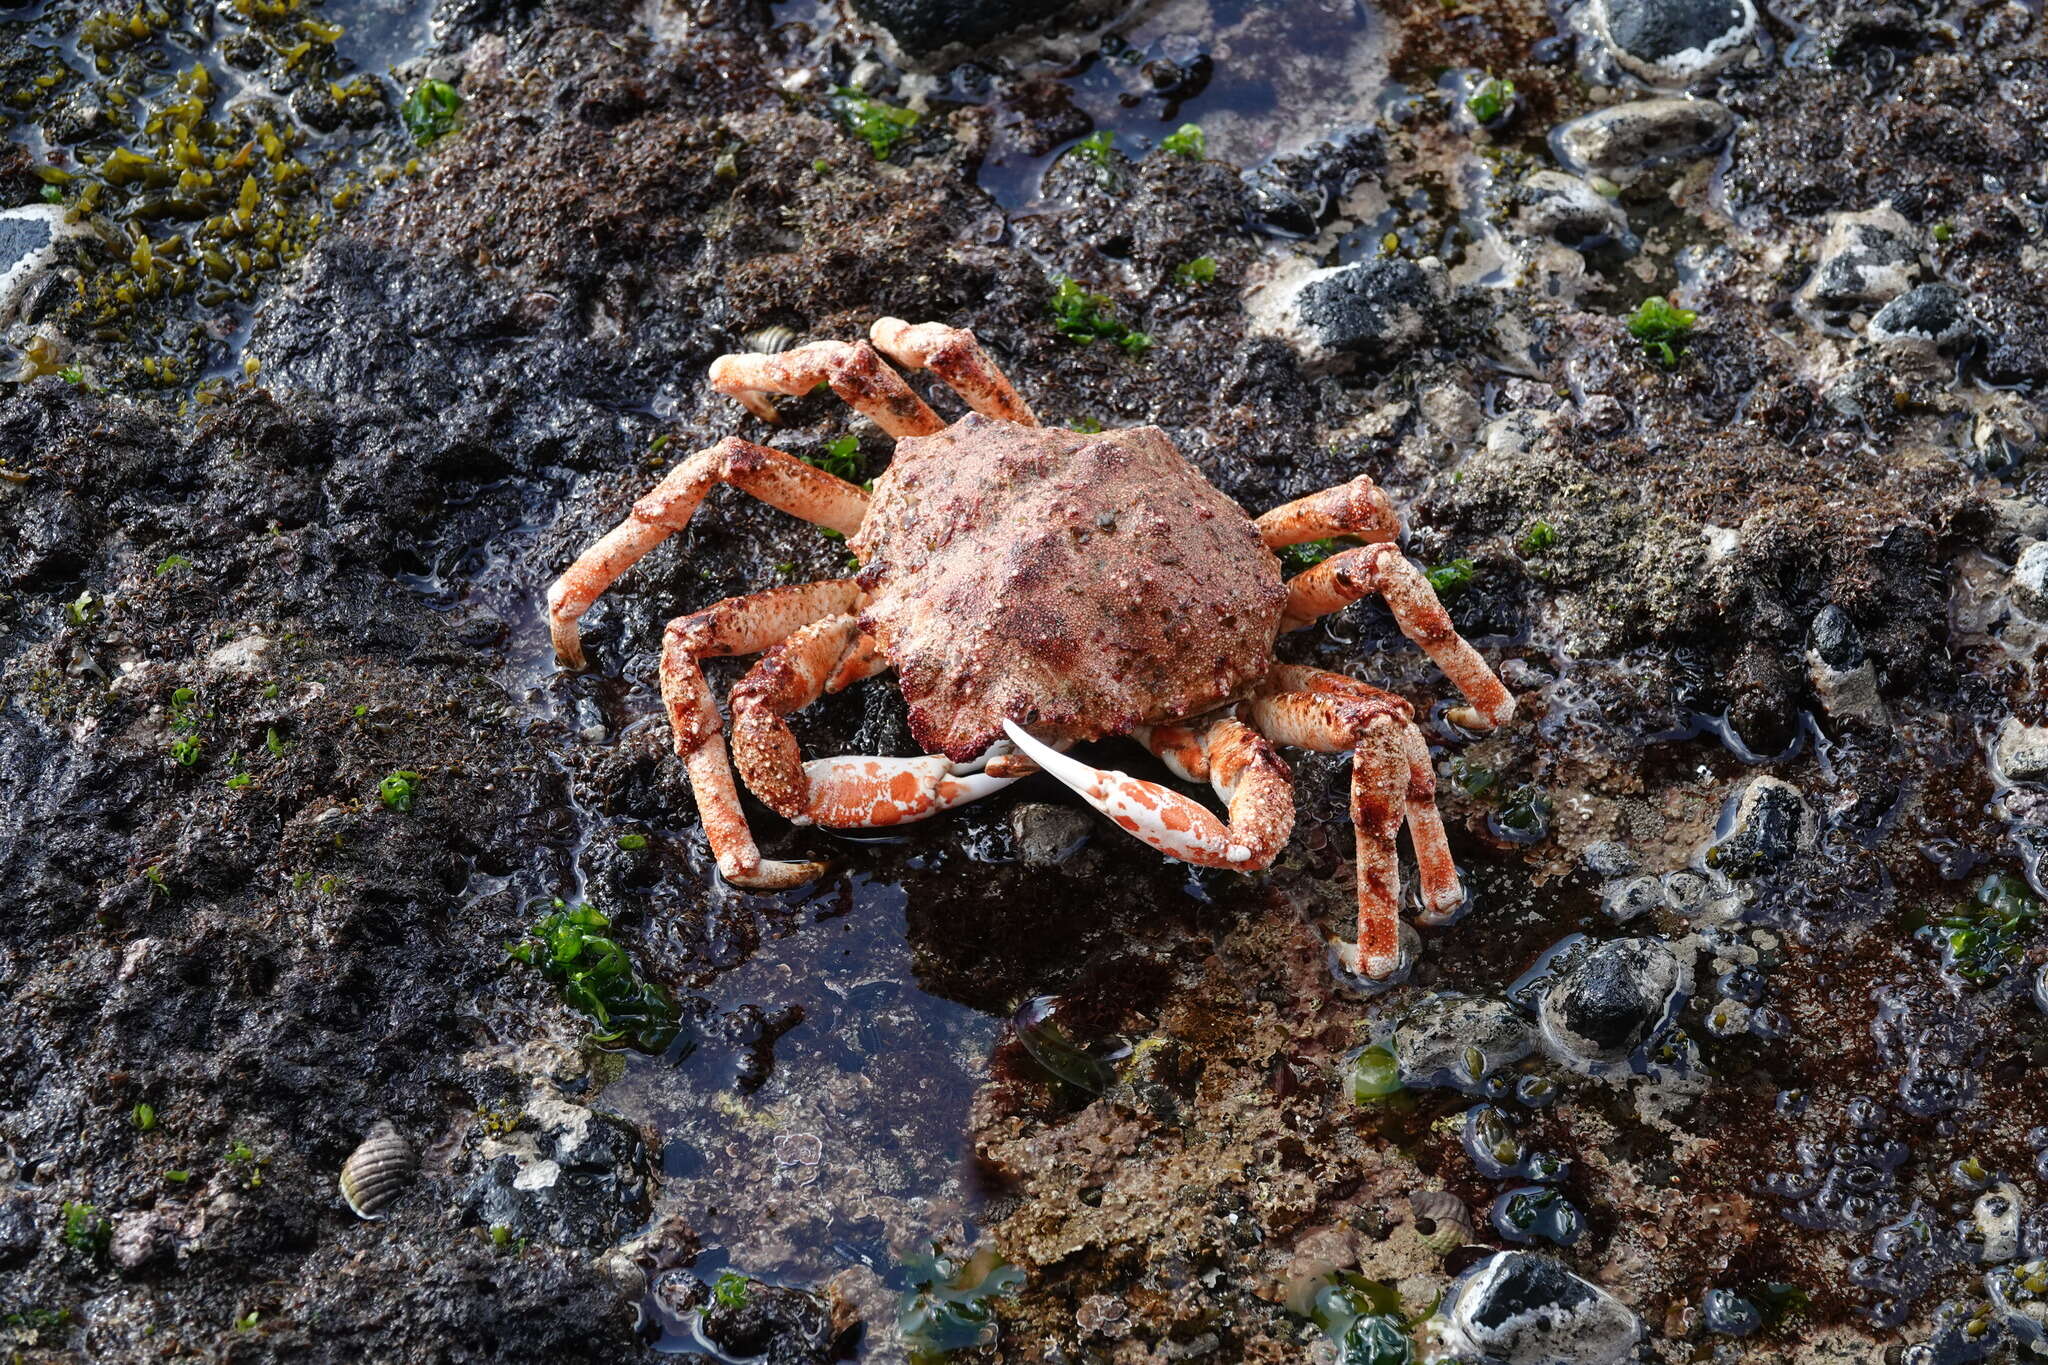 Image of southern spider crab